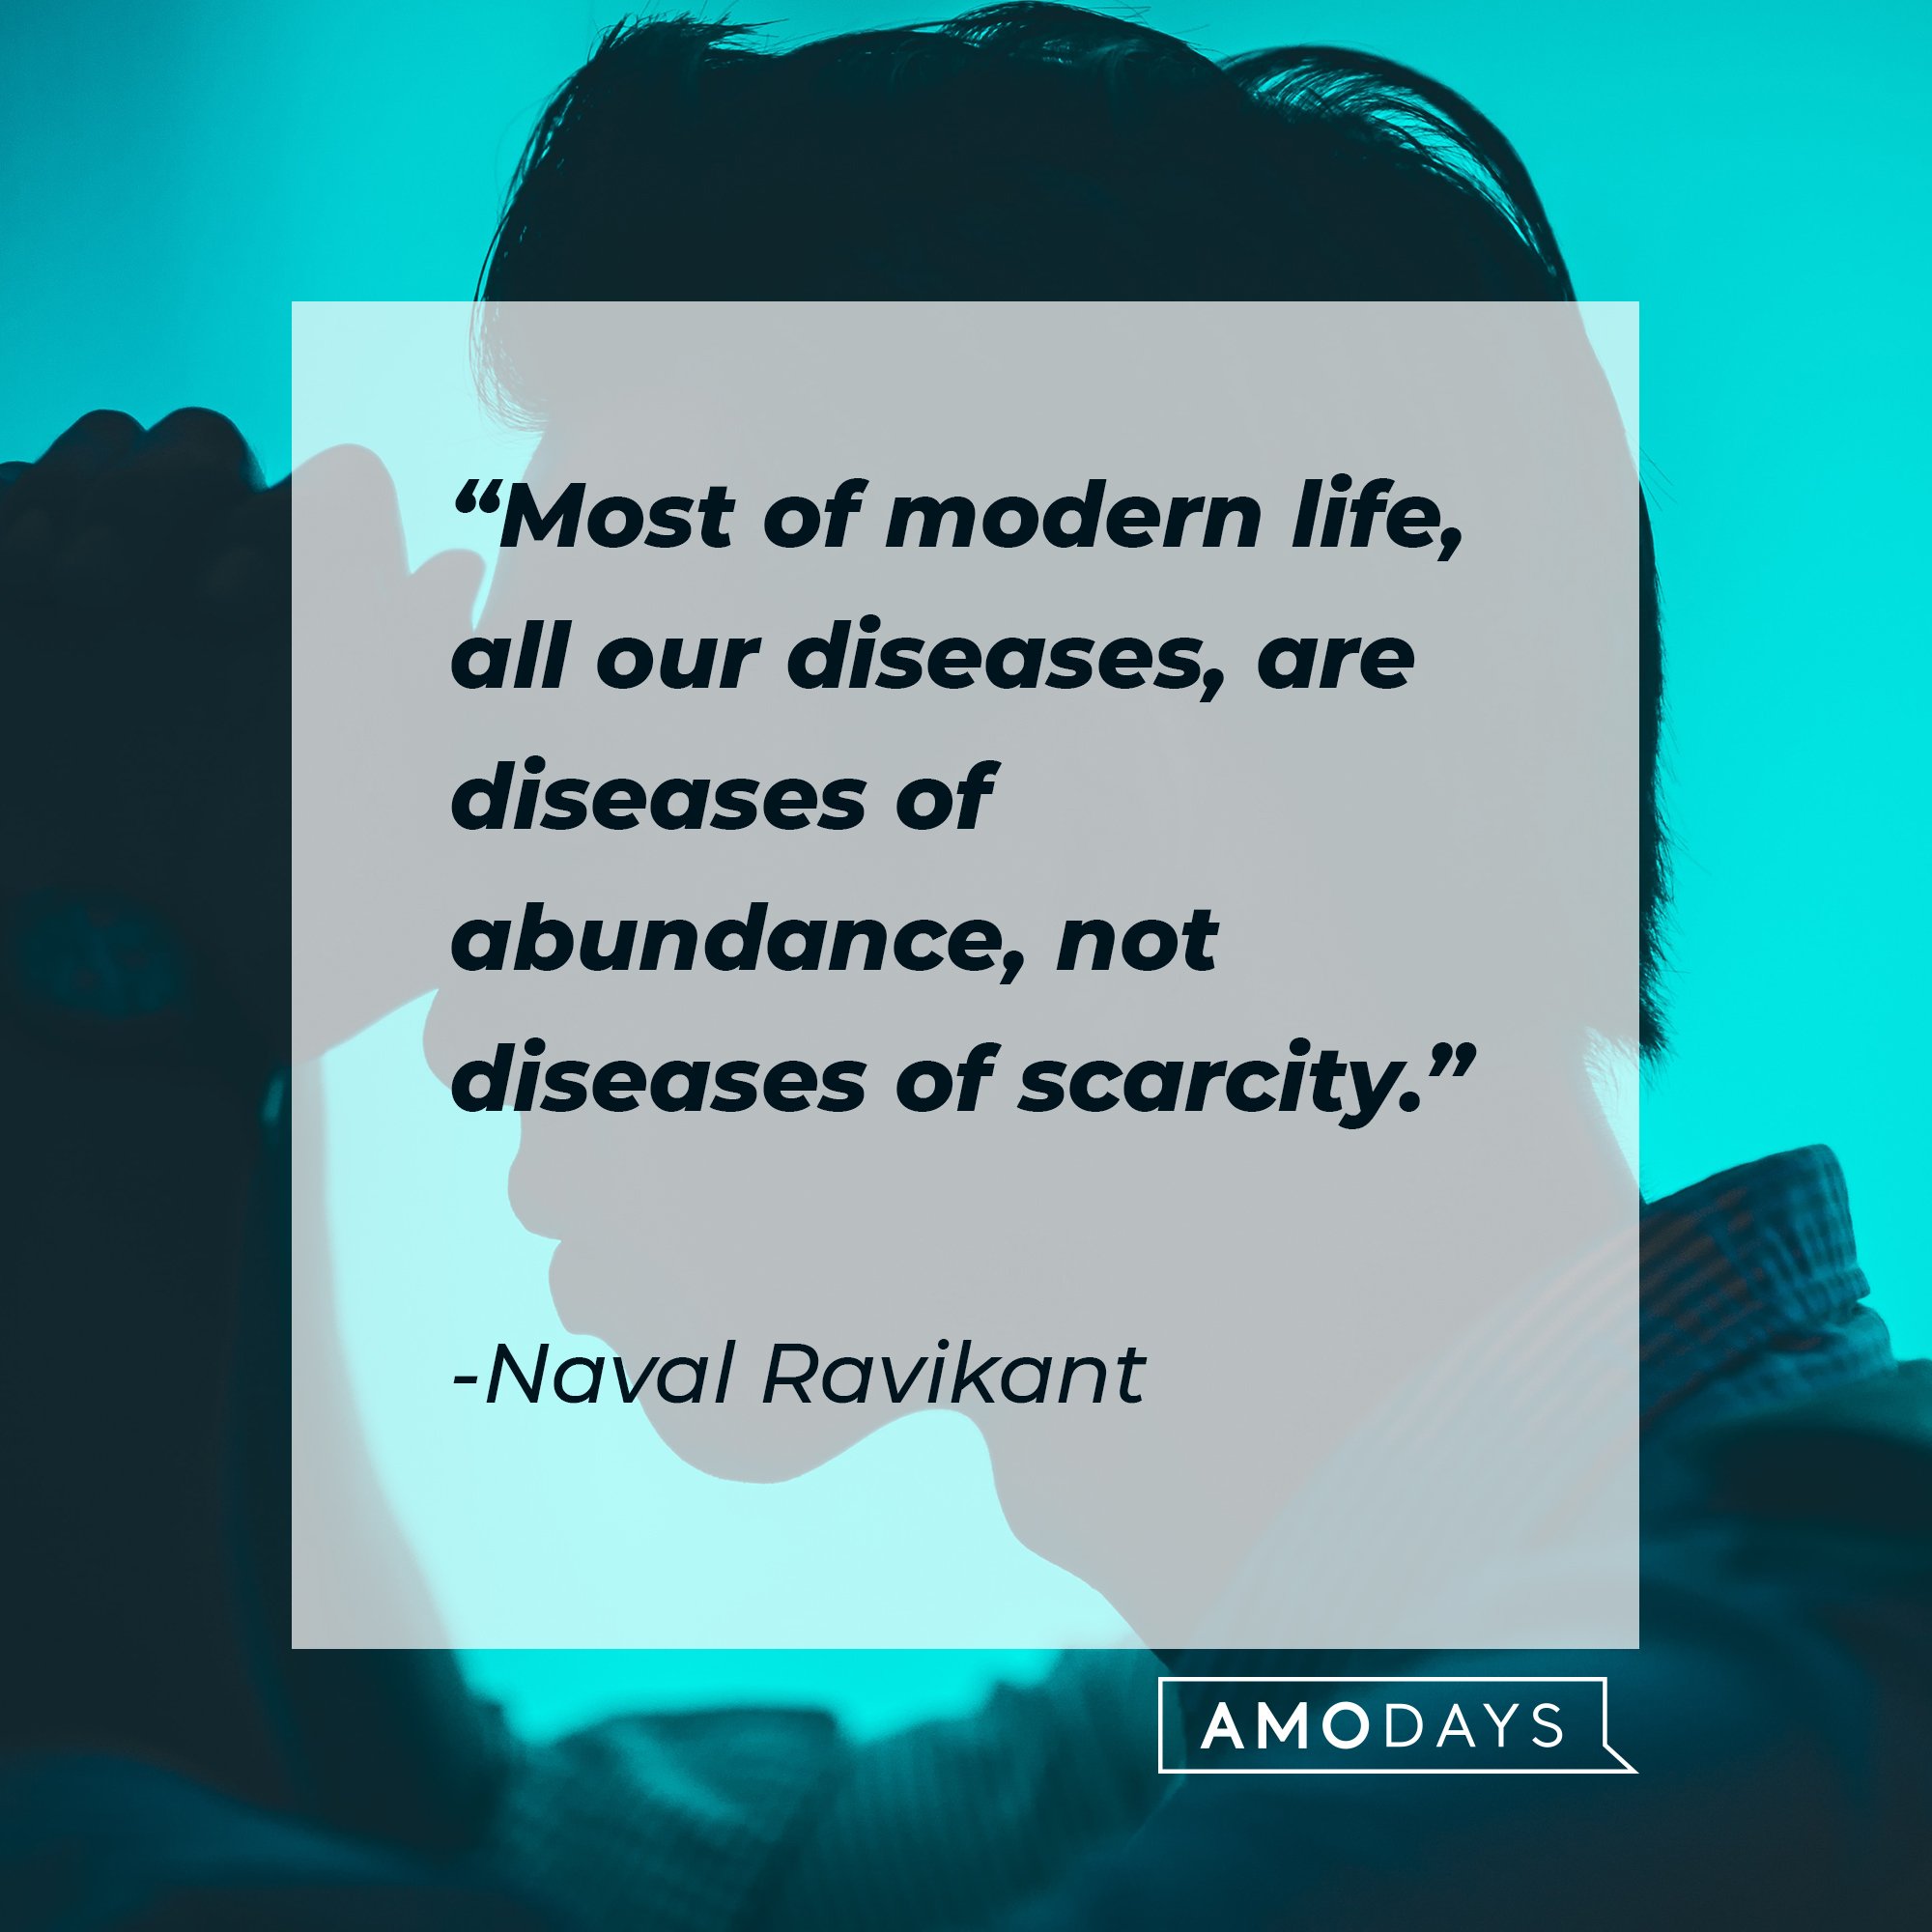 Naval Ravikant's quote: "Most of modern life, all our diseases, are diseases of abundance, not diseases of scarcity." | Image: AmoDays